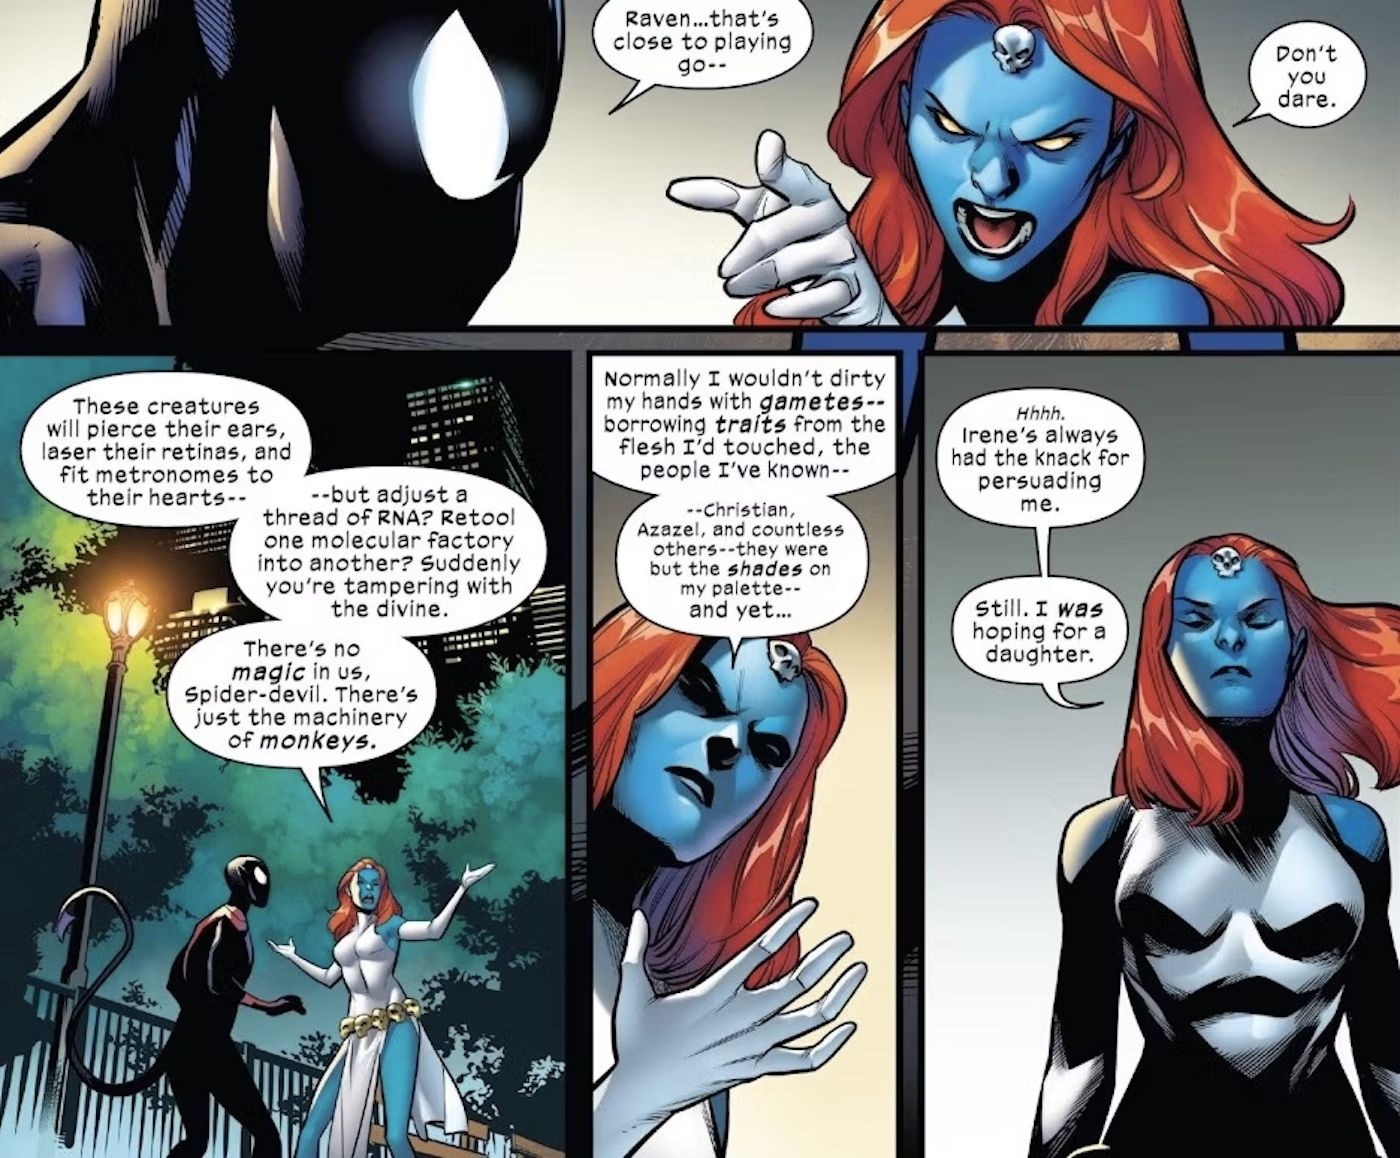 Tigris Mystique Her powers: - Enhanced Strength and Agility: Like